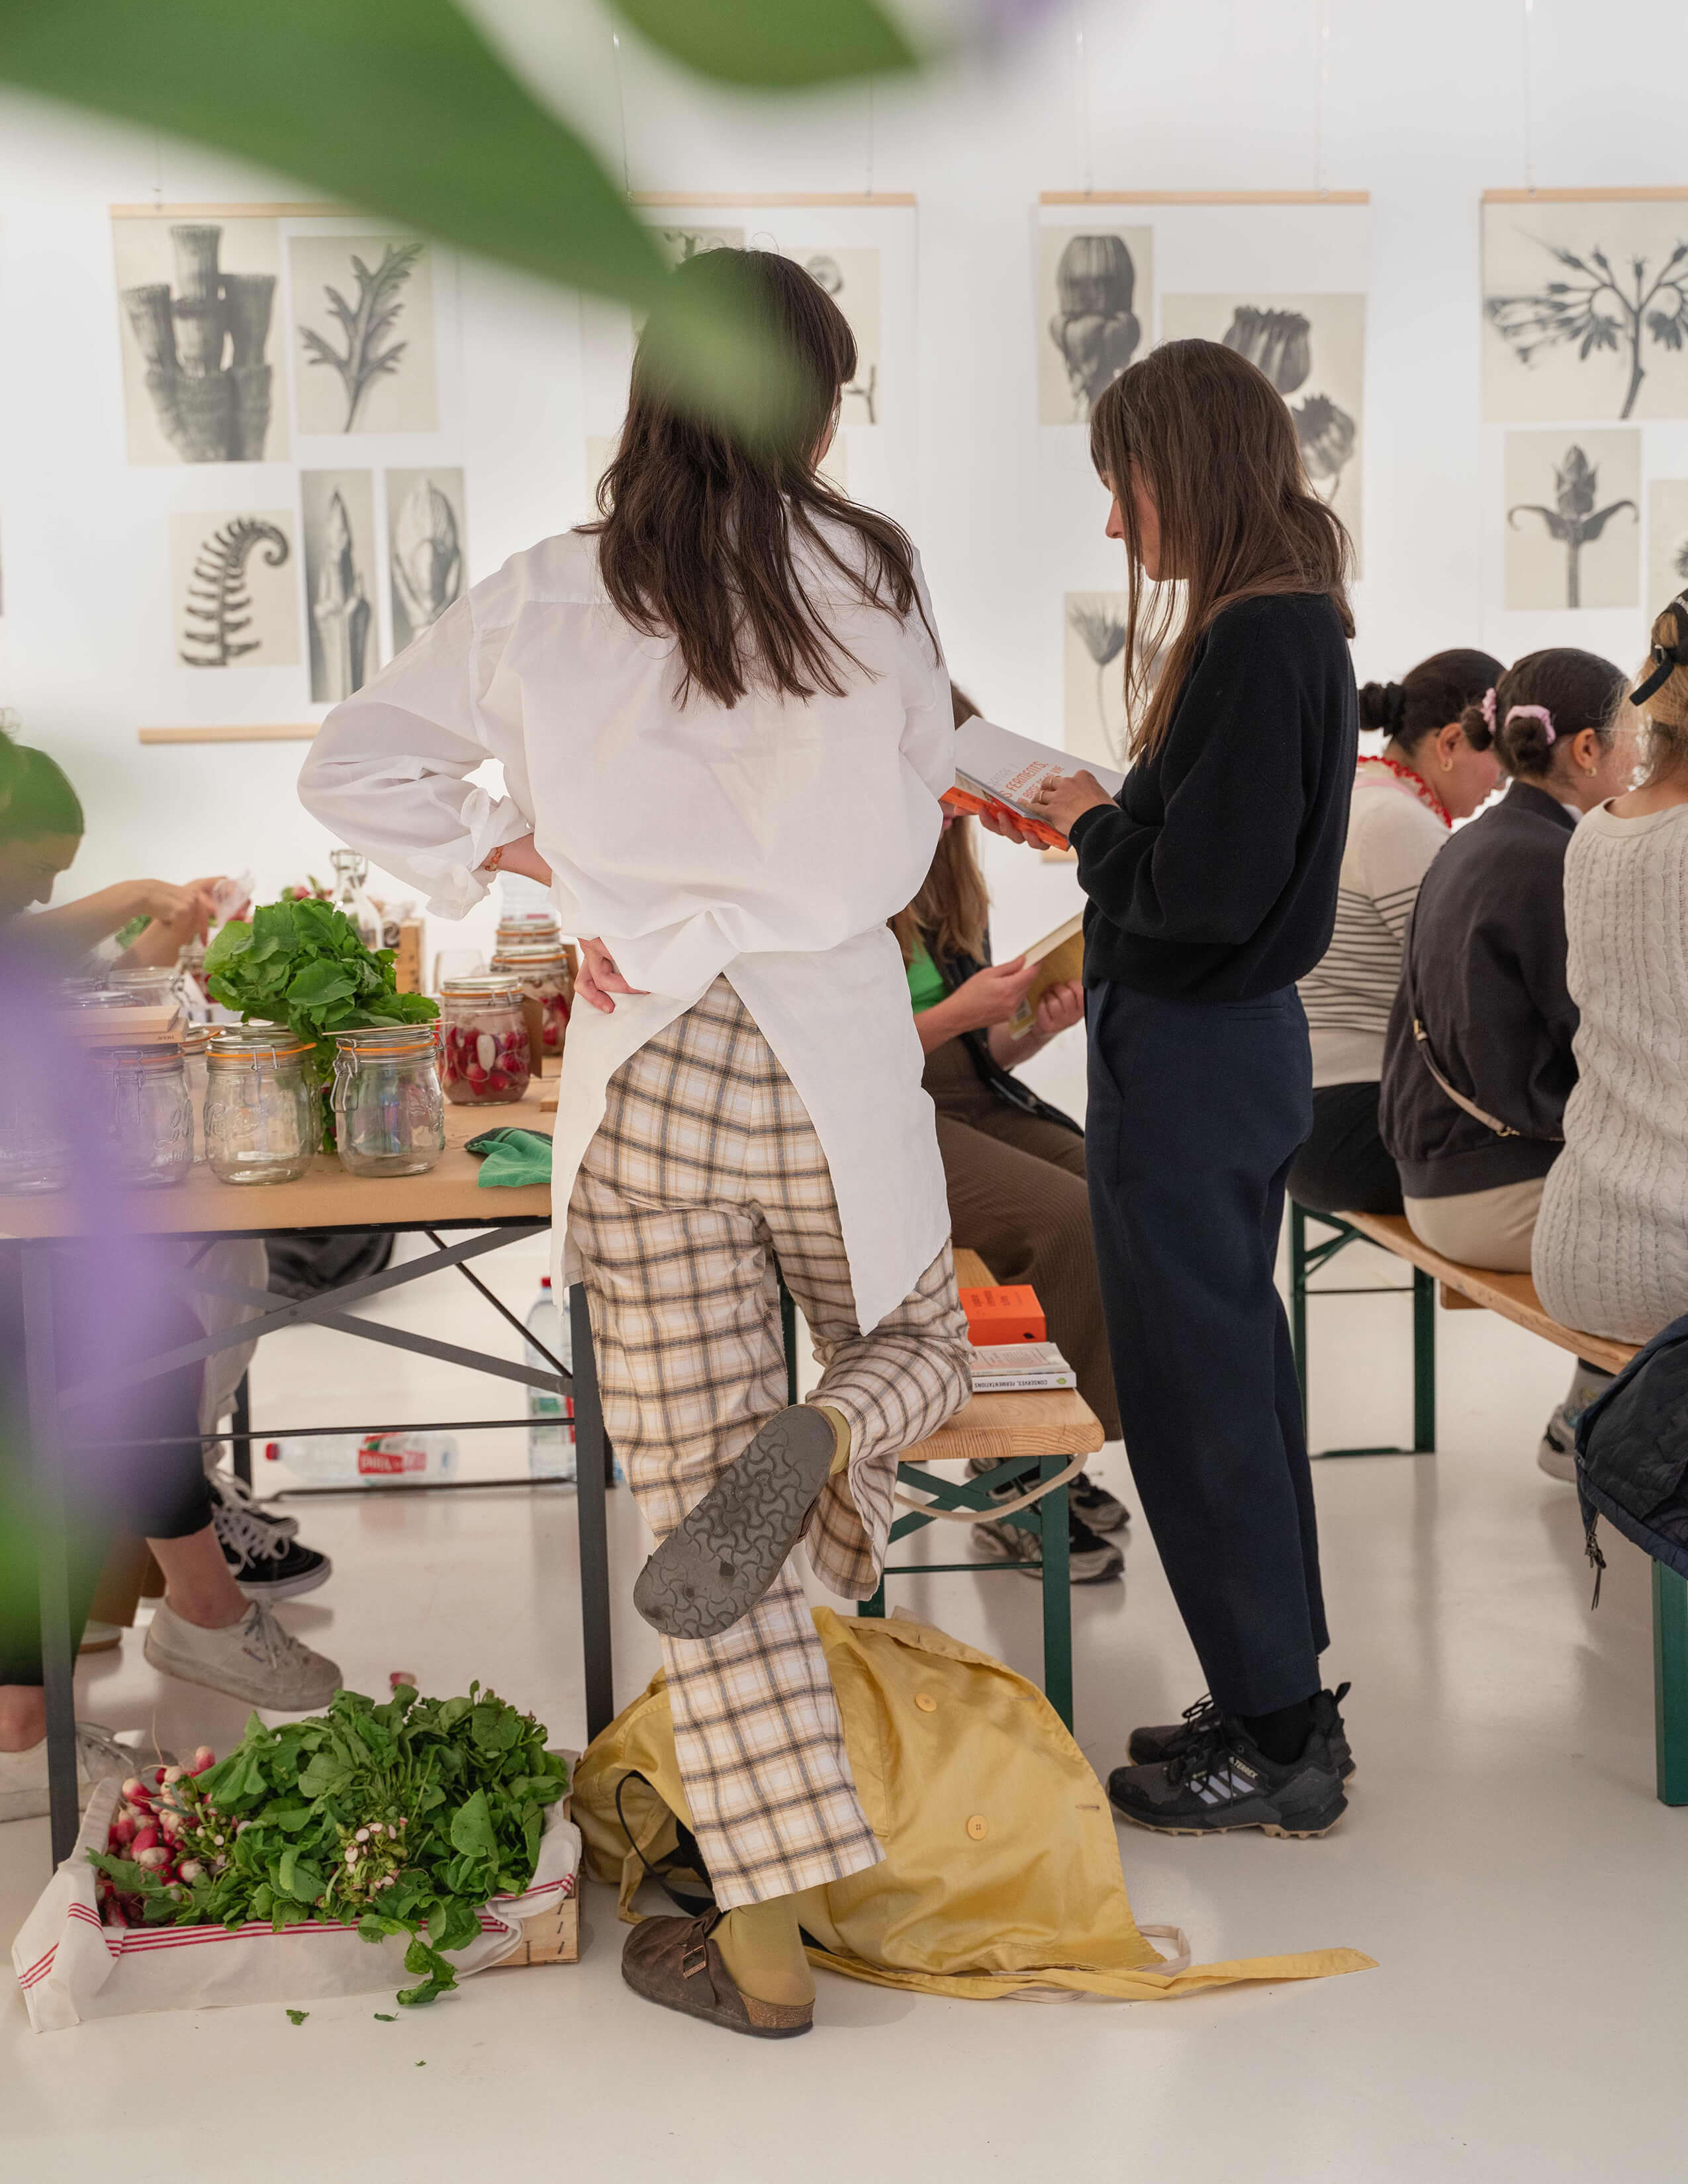 Some people sat down and some stood up in the room. There are some plants, and vegetables on the floor and some are in the jars on the table—a load of pieces of plant theme art behind on the wall.